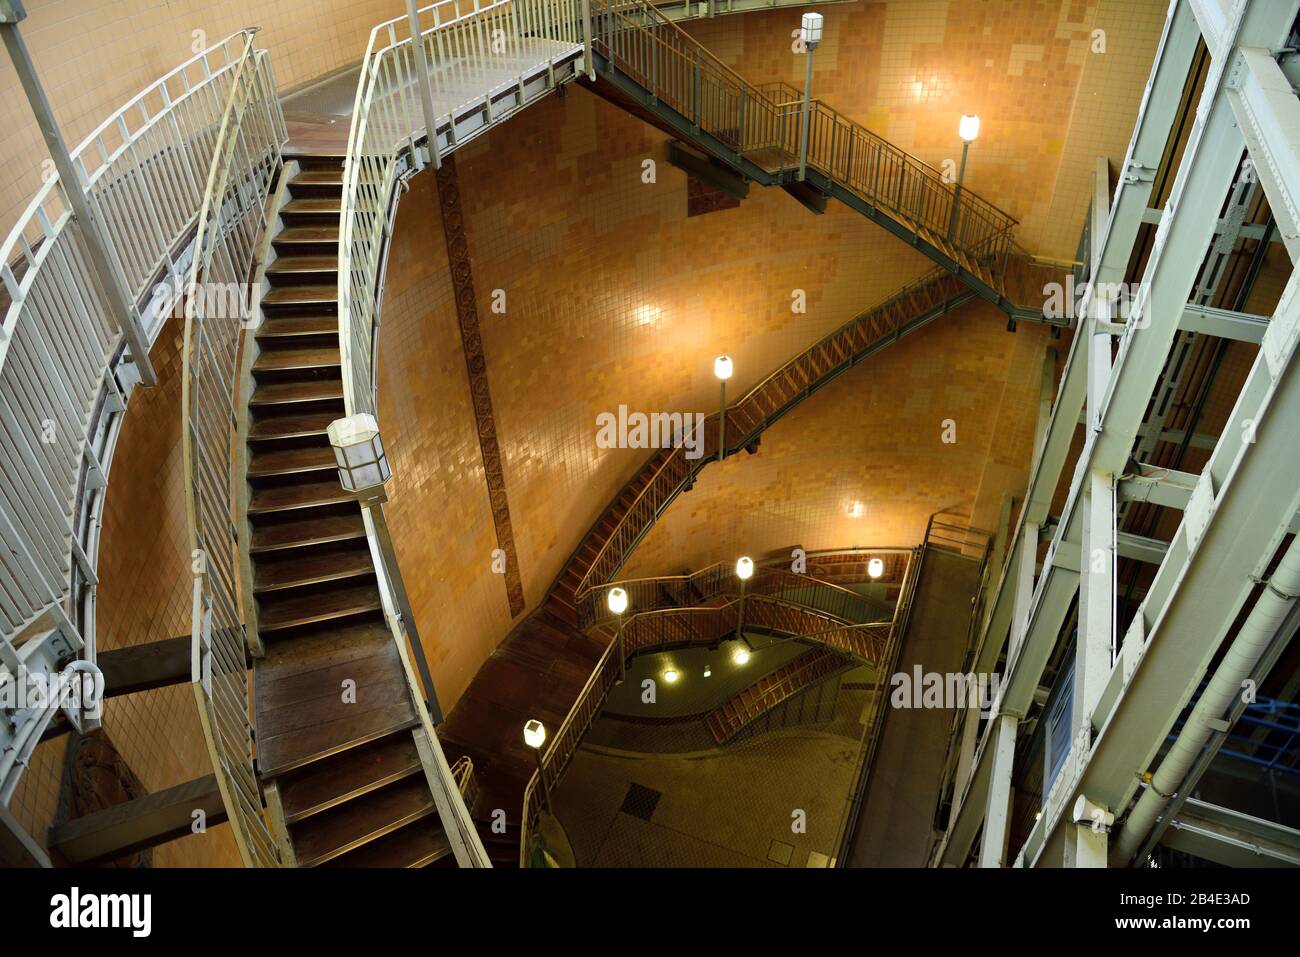 Europe, Germany, Hamburg, City, harbor, Old Elbtunnel under the Elbe, restored east tube, interior view, connection between St. Pauli and harbor, built in 1911, staircase, Stock Photo